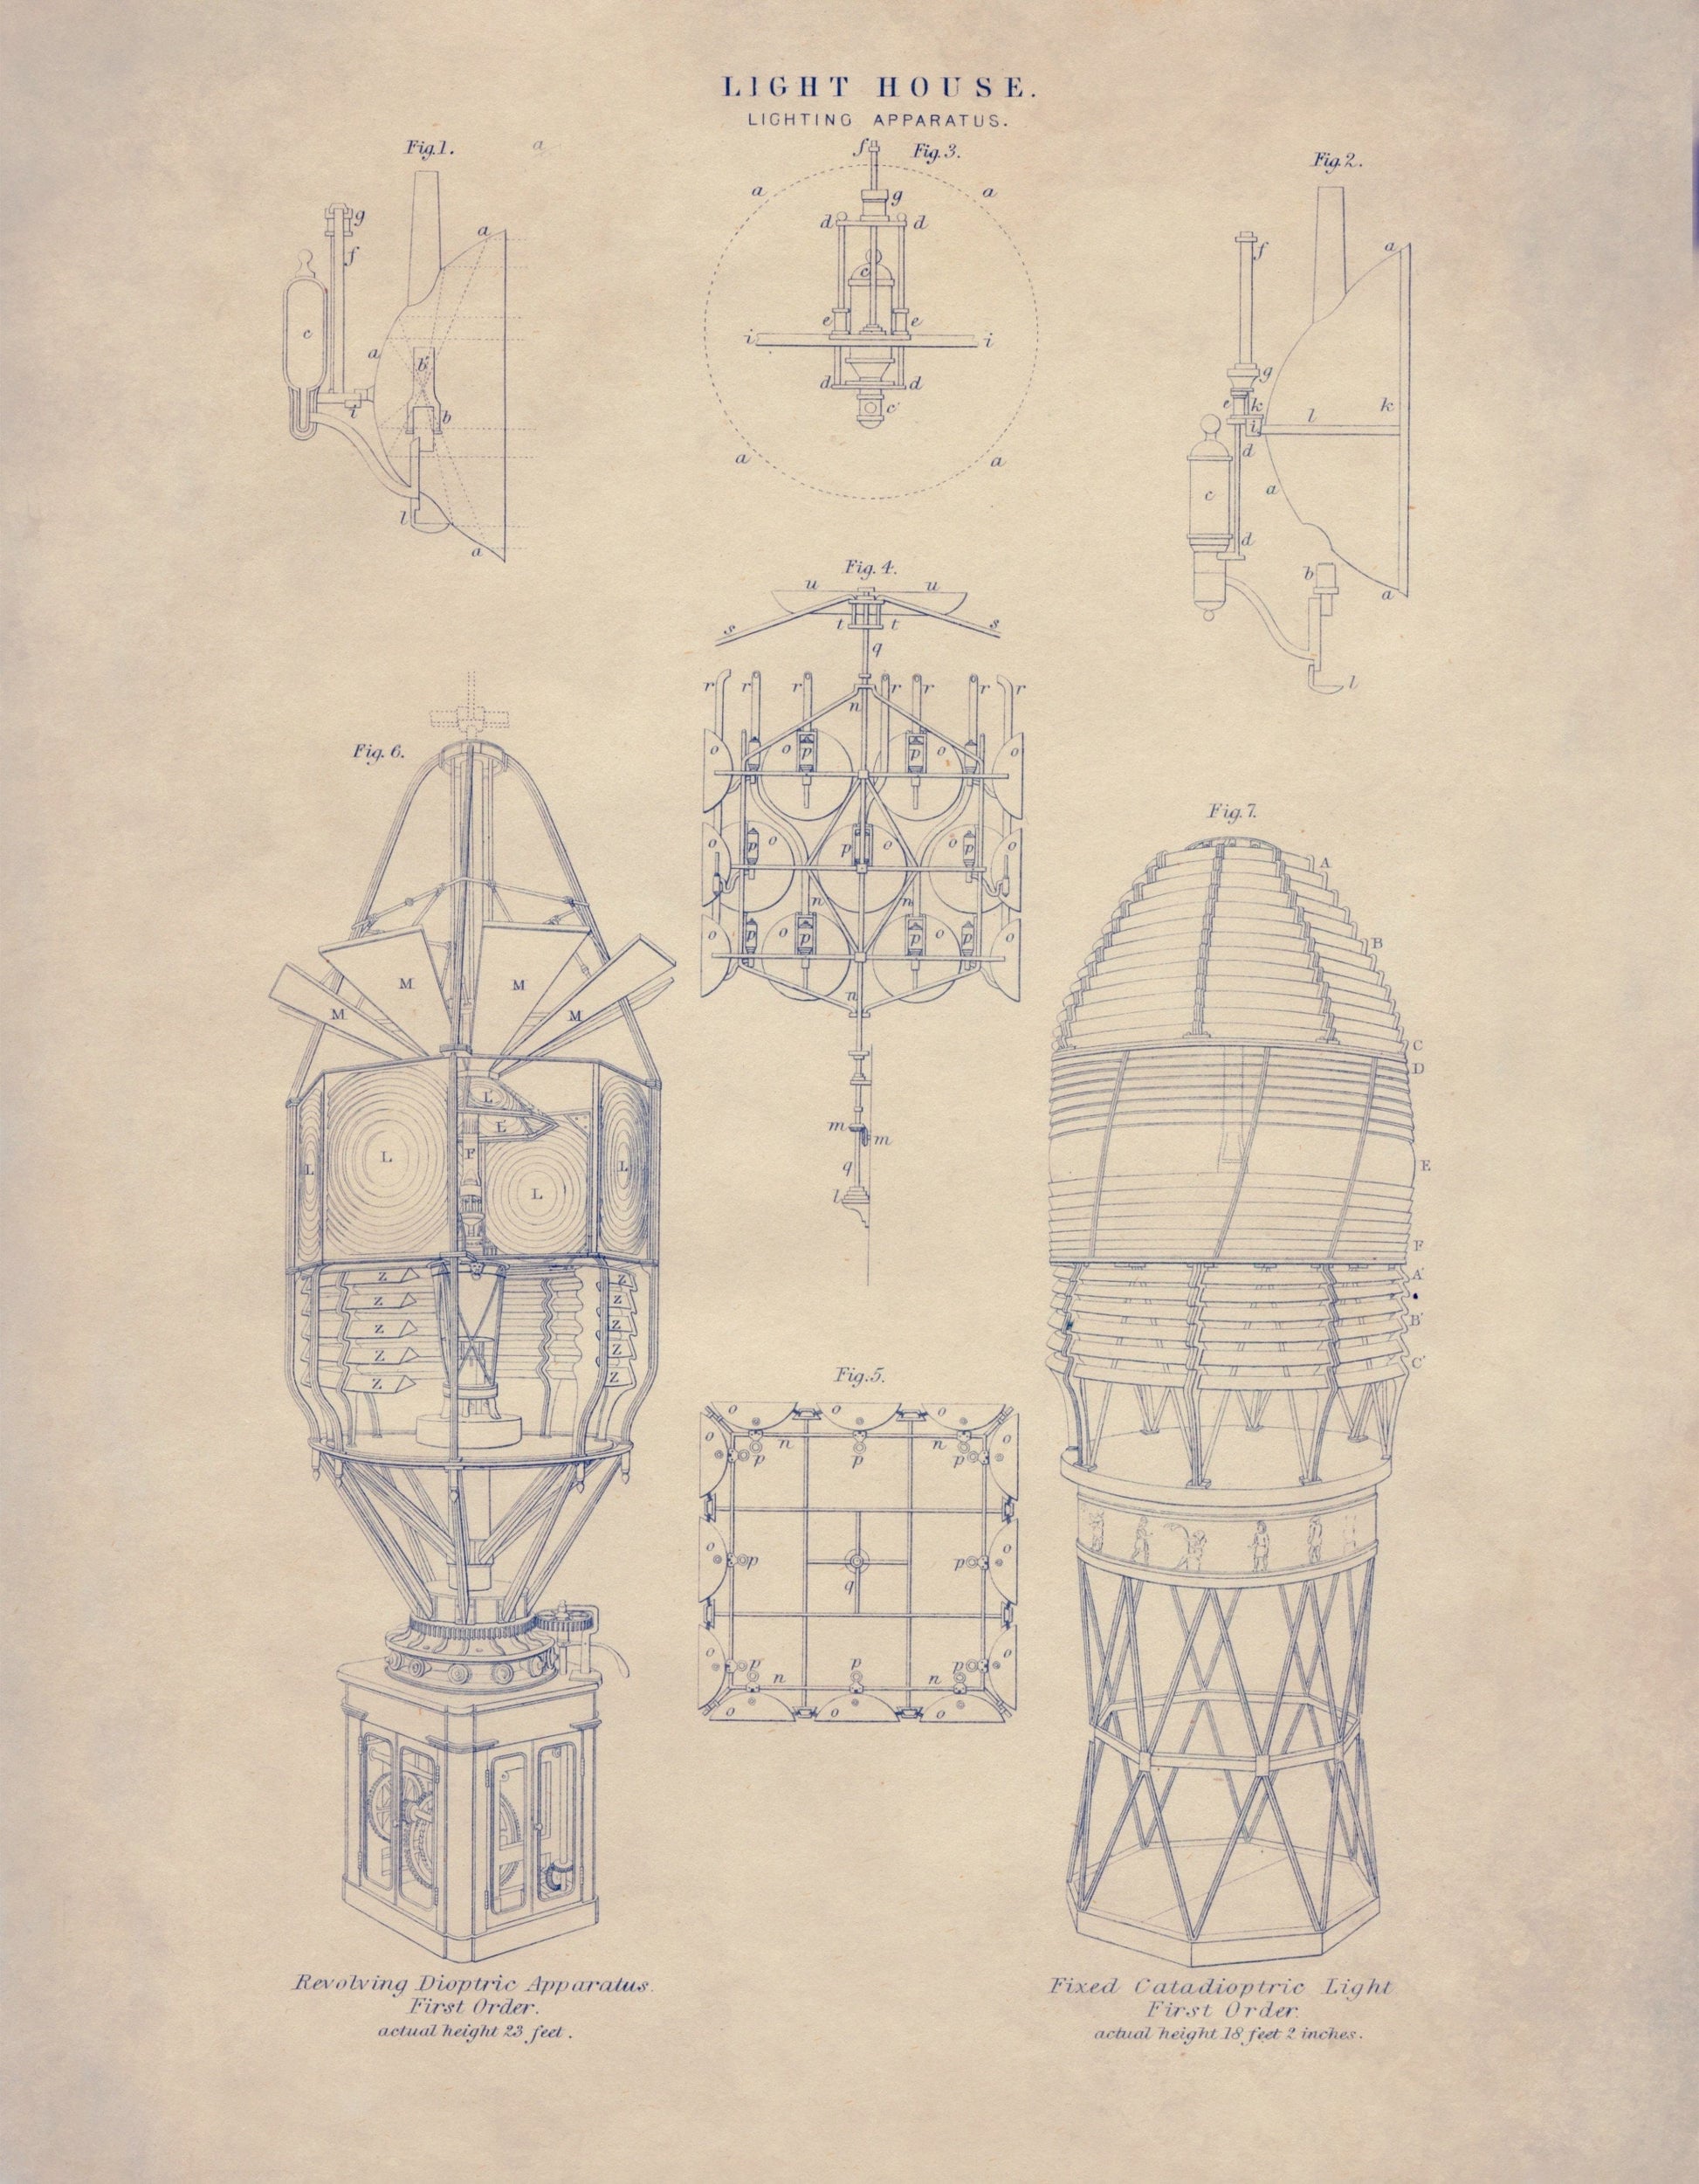 Lighthouse Diagram - Antique Reproduction - Lighting Apparatus - Dioptric and Catadioptric Lights - Nautical Decor - Available Framed